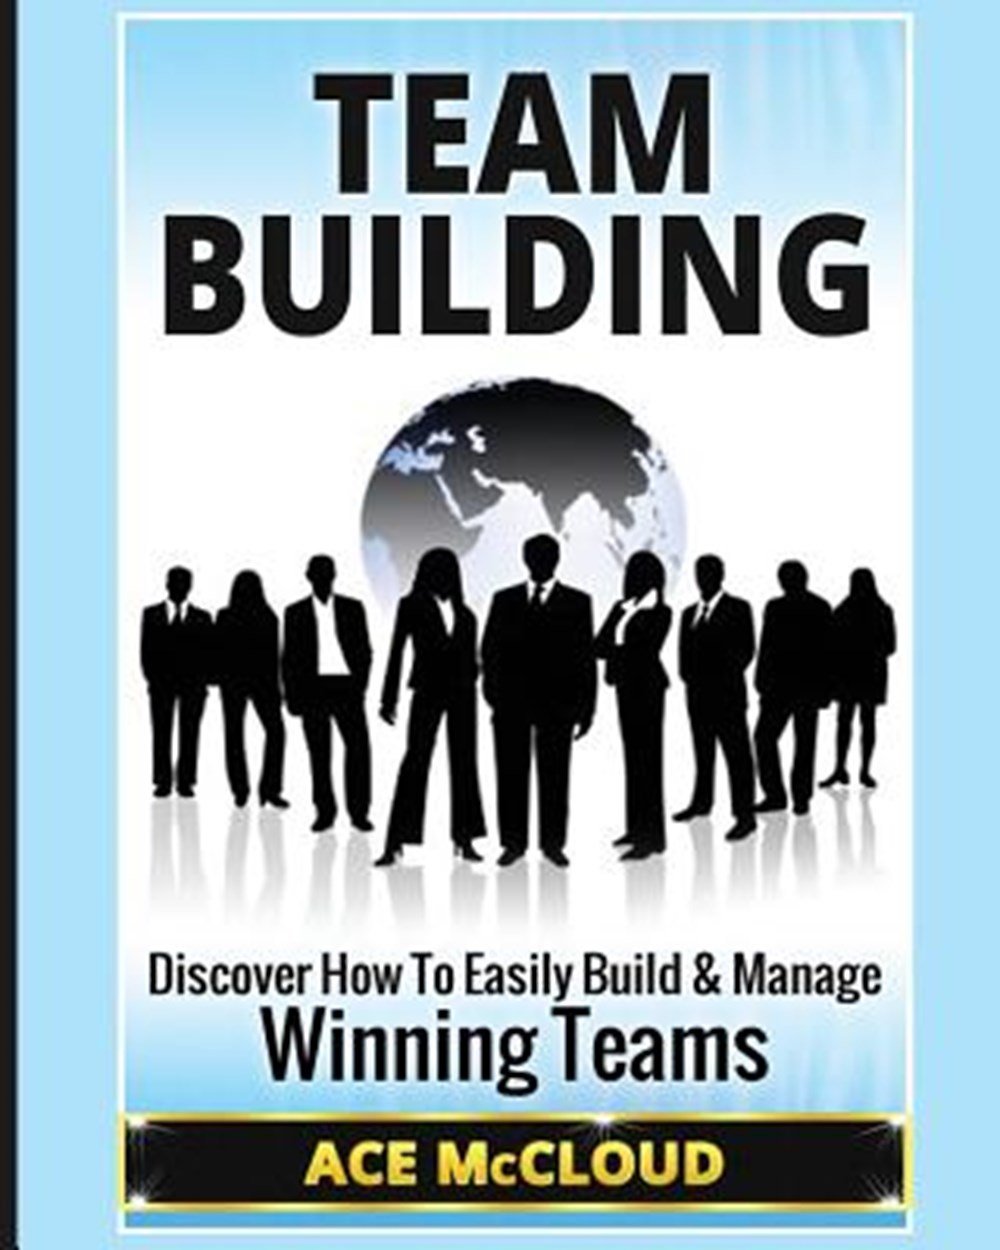 Team Building Discover How To Easily Build & Manage Winning Teams